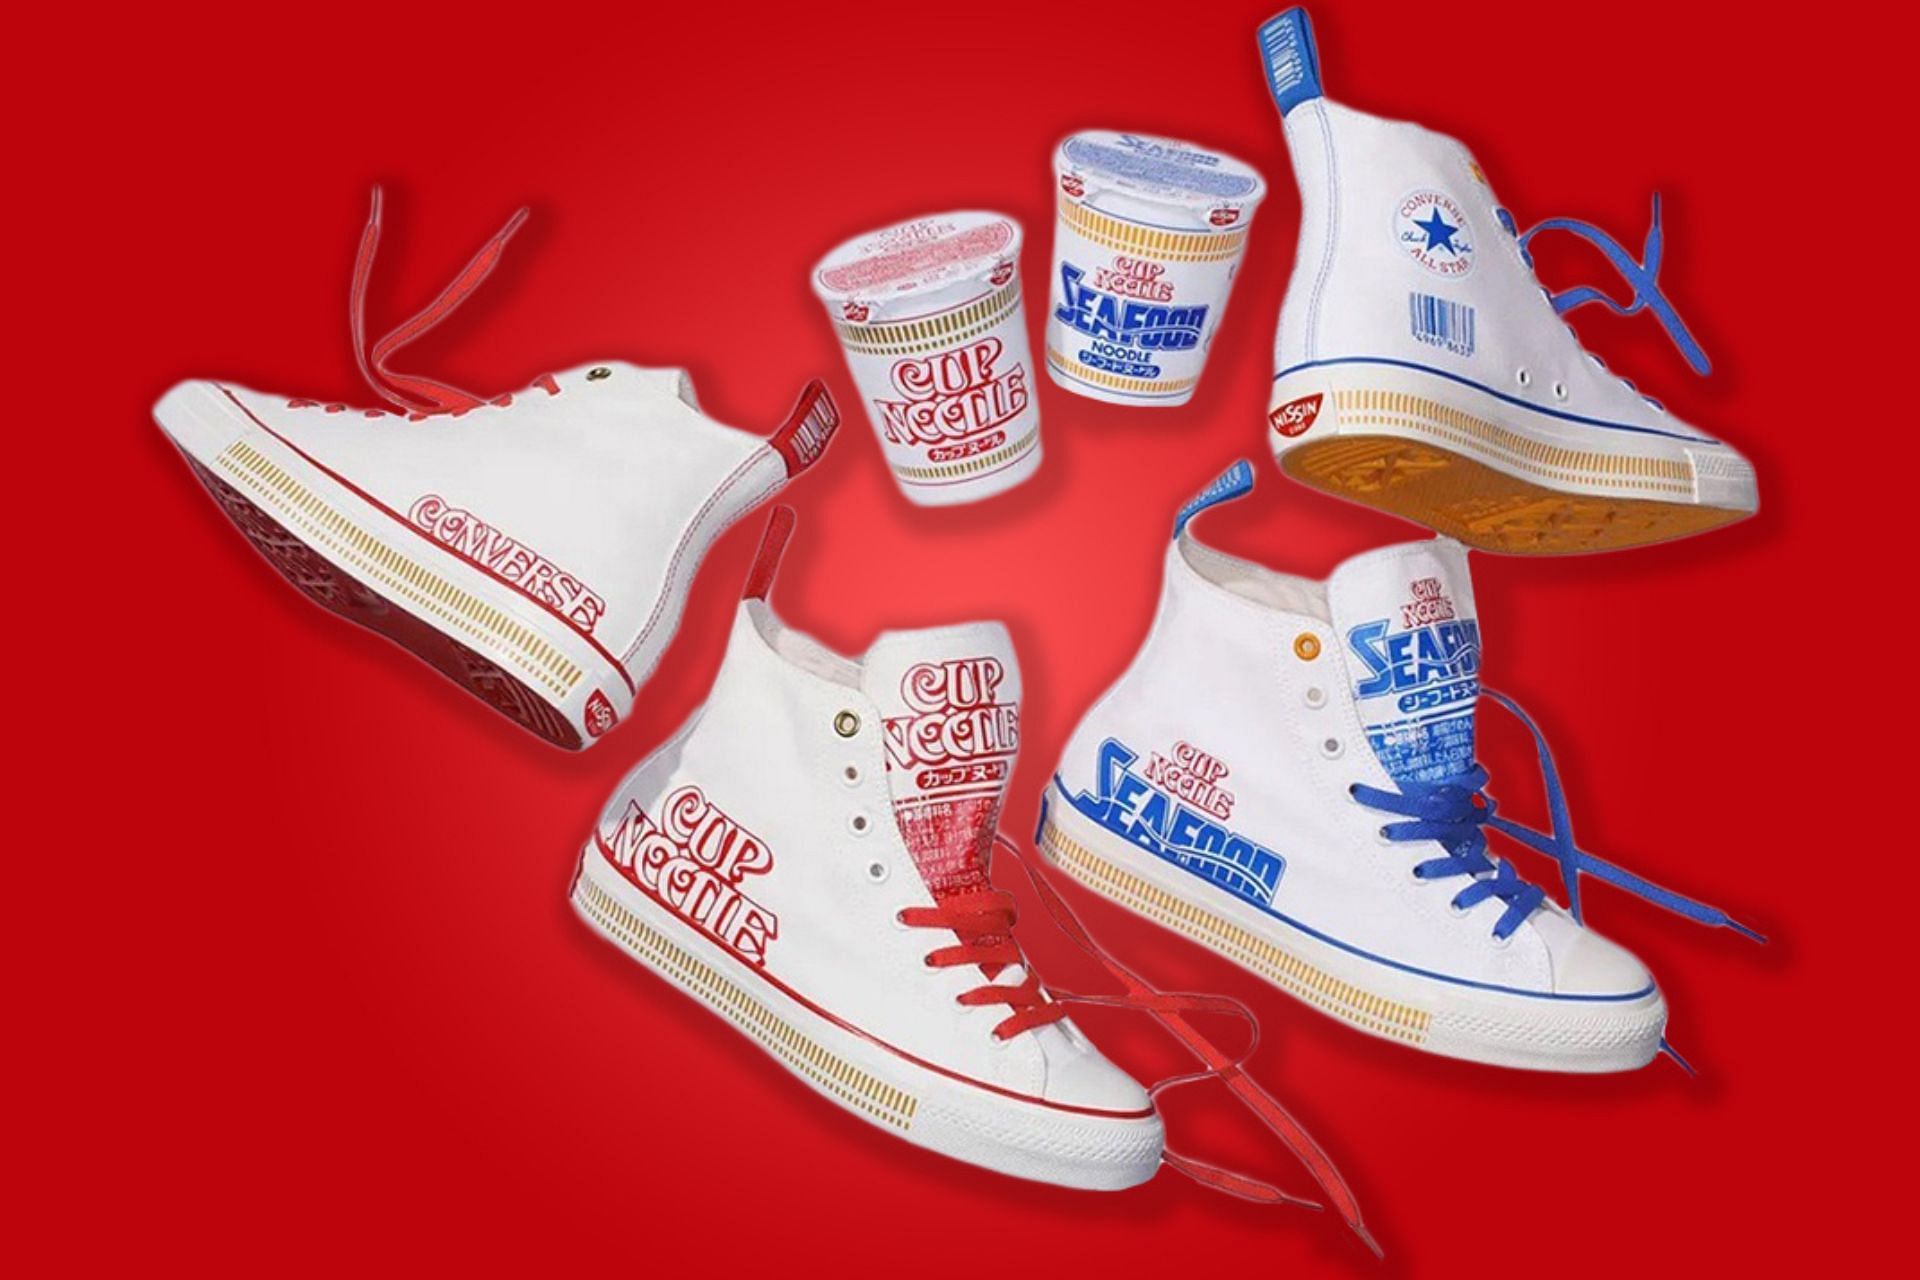 Nissin Foods x Converse All-Star R Cup Noodles sneaker pack (Image via Converse)